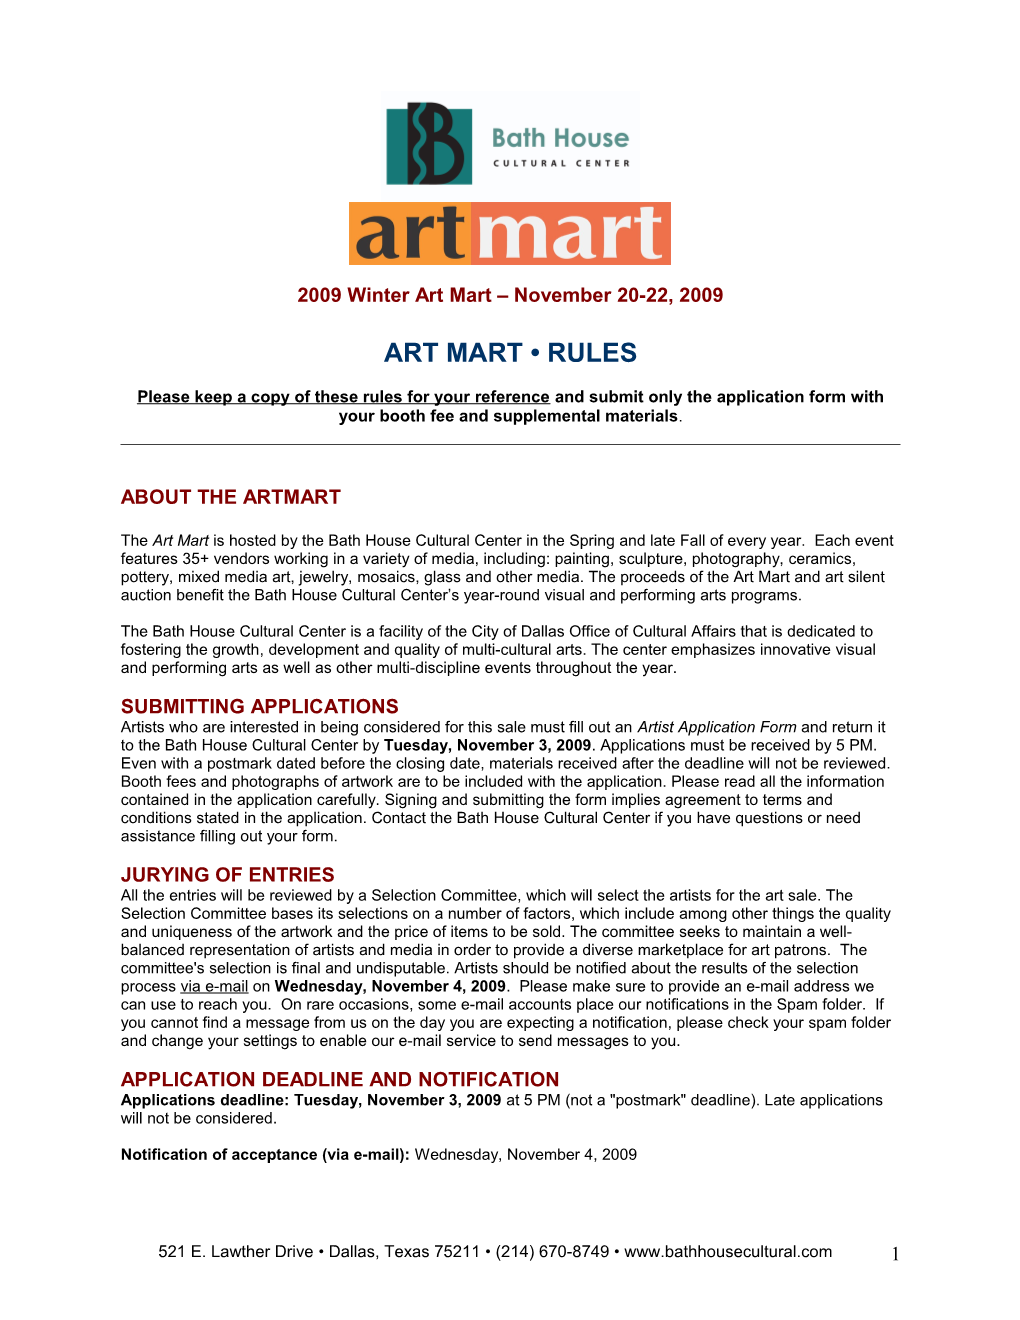 About the Artmart